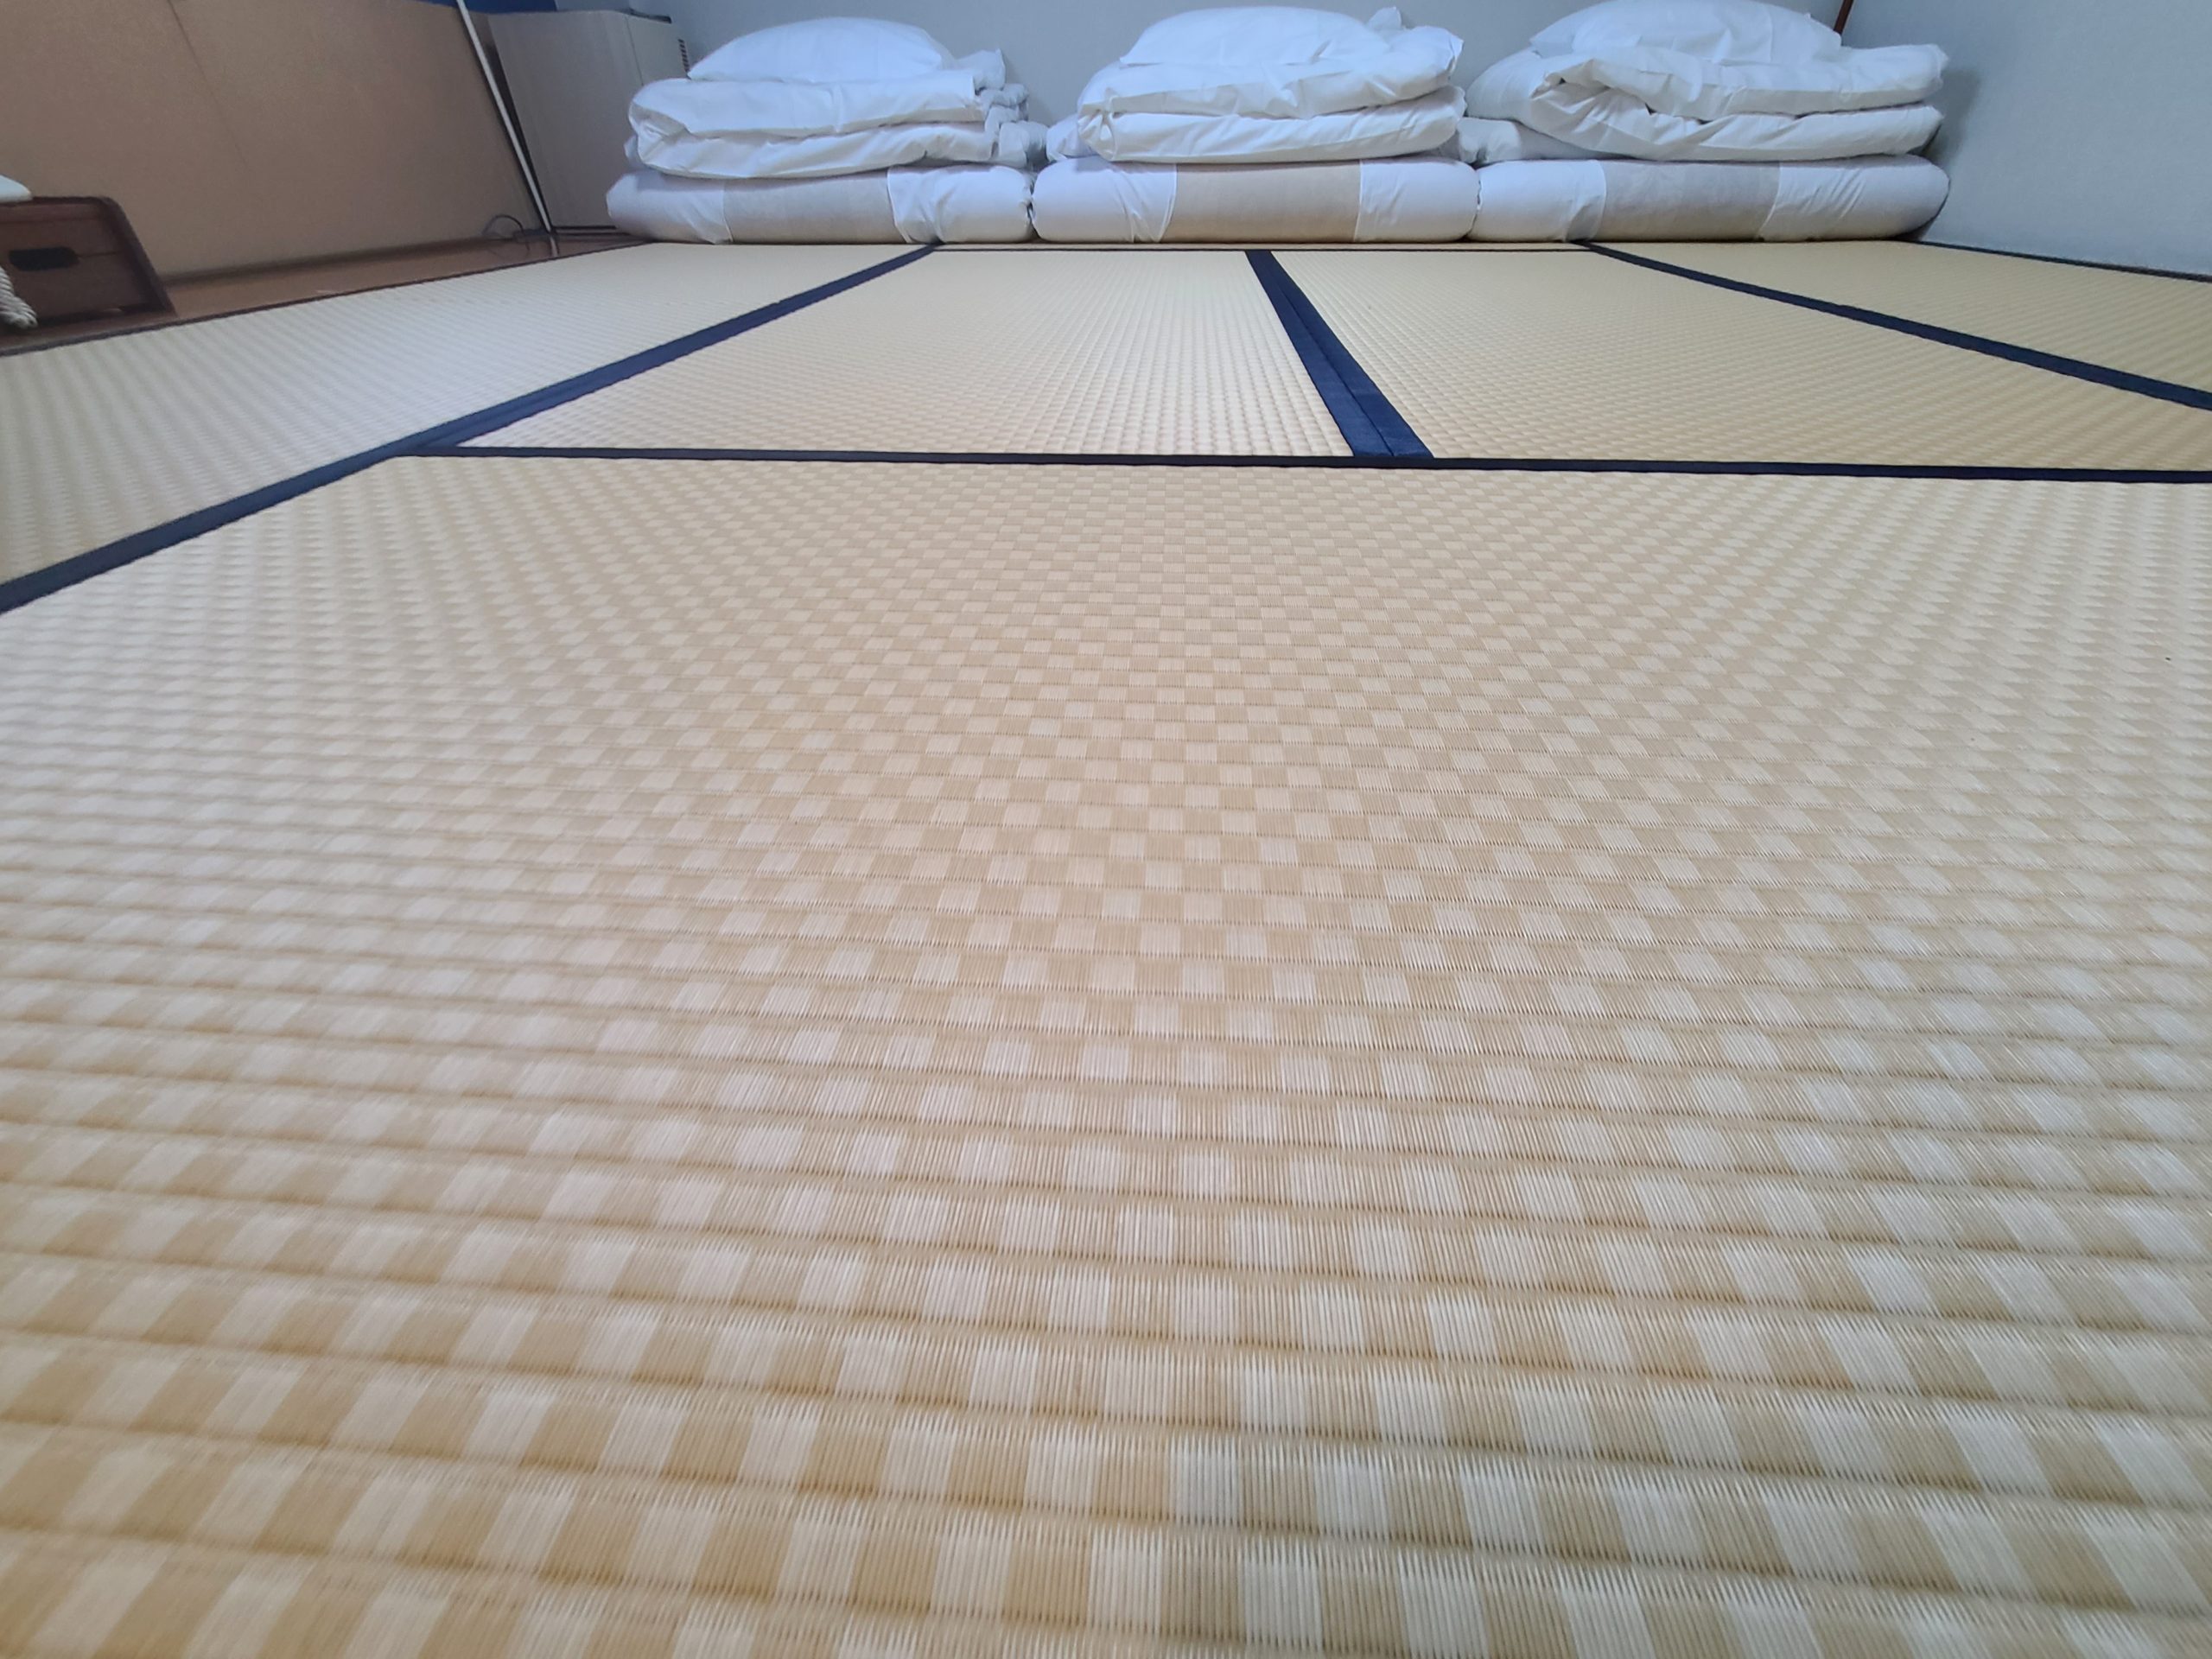 While usually tatami come woven in rows, the tatami here are consistent with the theme in the western-style rooms, woven in a checkered pattern. Somehow this tiny detail is an absolute delight to my senses.